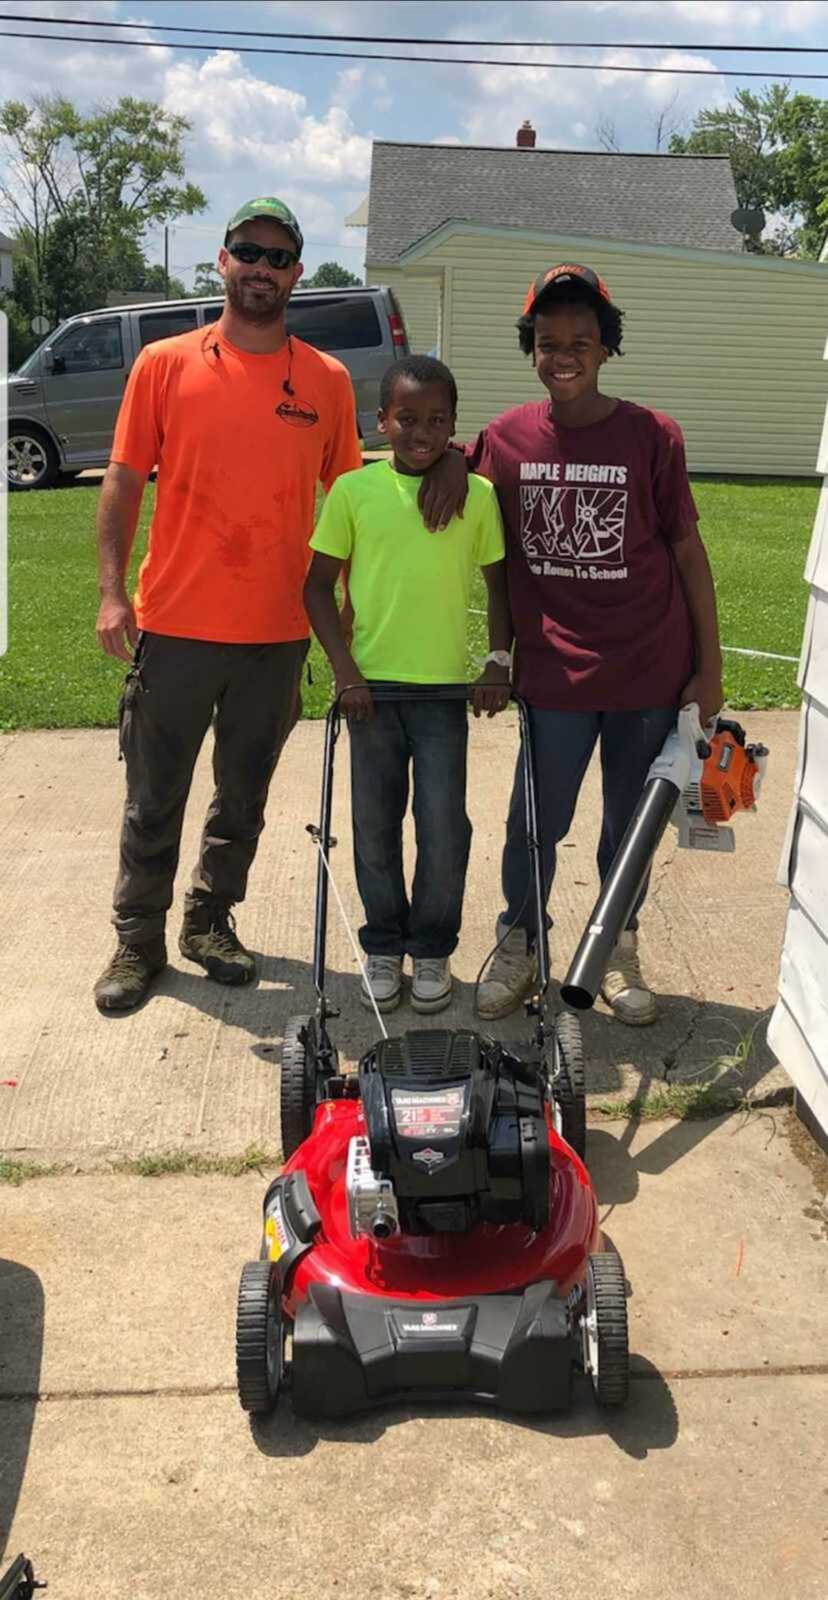 man who donated lawn mowing supplies stands with two young boys holding lawnmower and blower